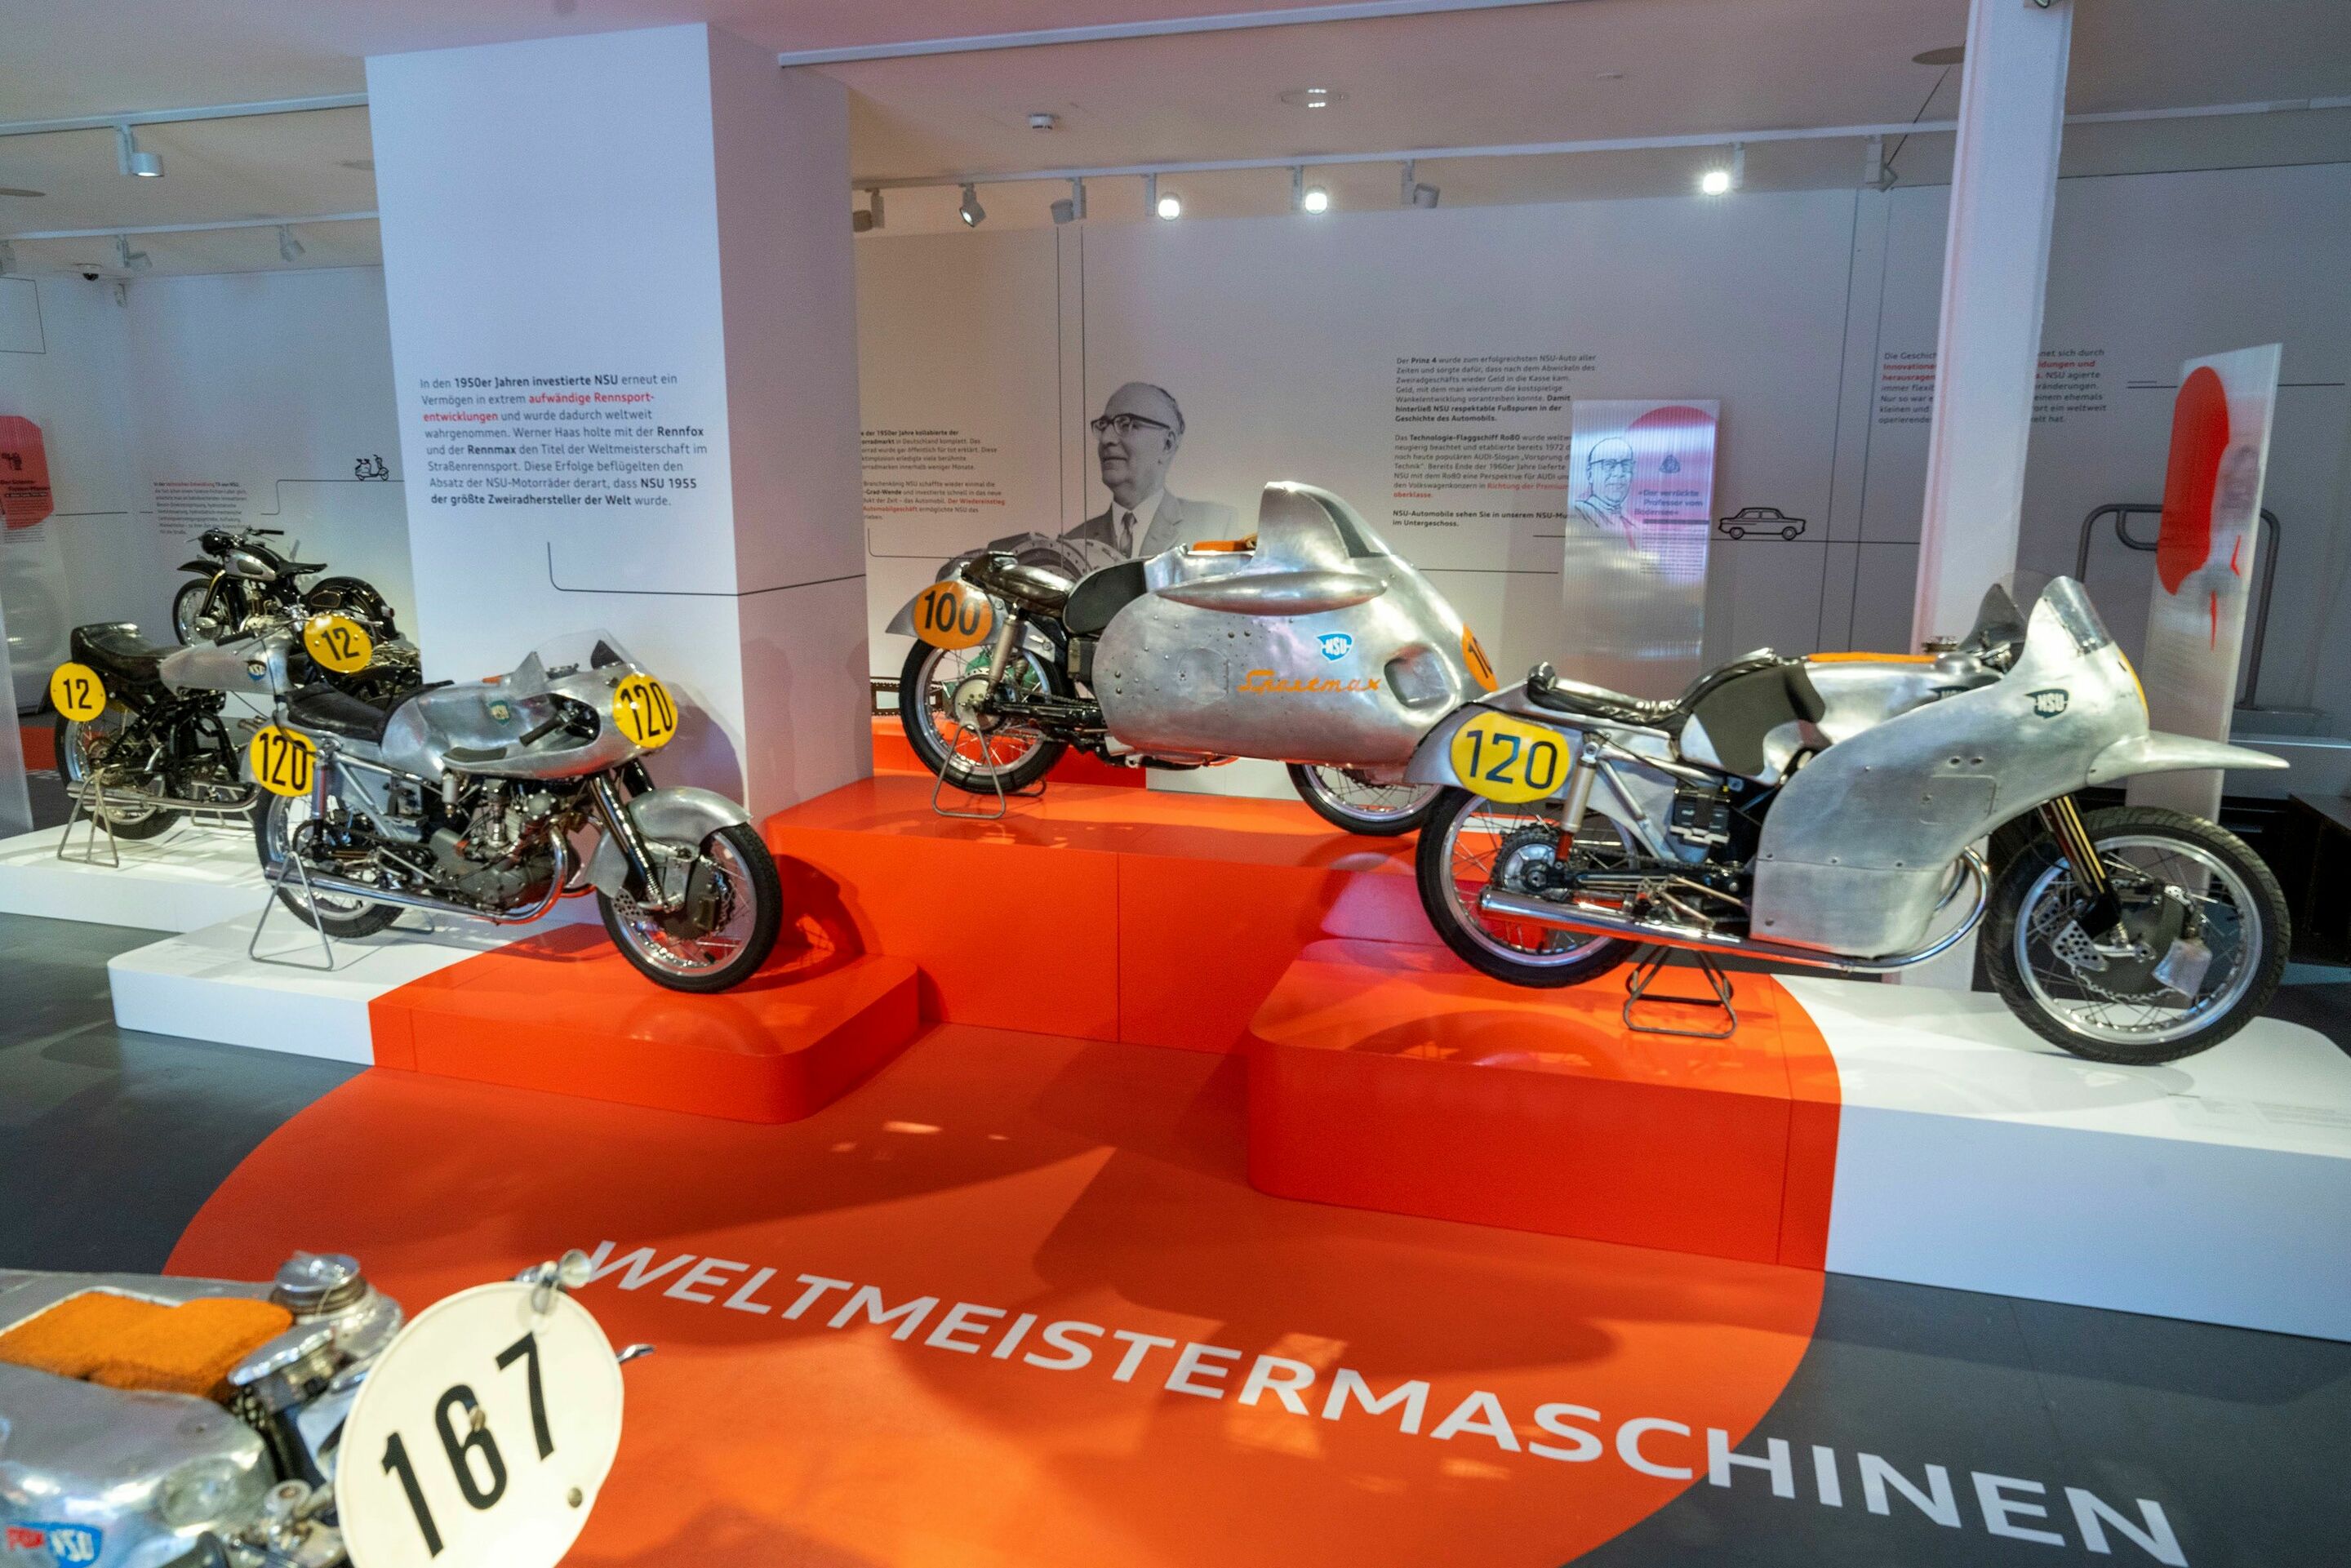 New special exhibition on the traditional brand NSU